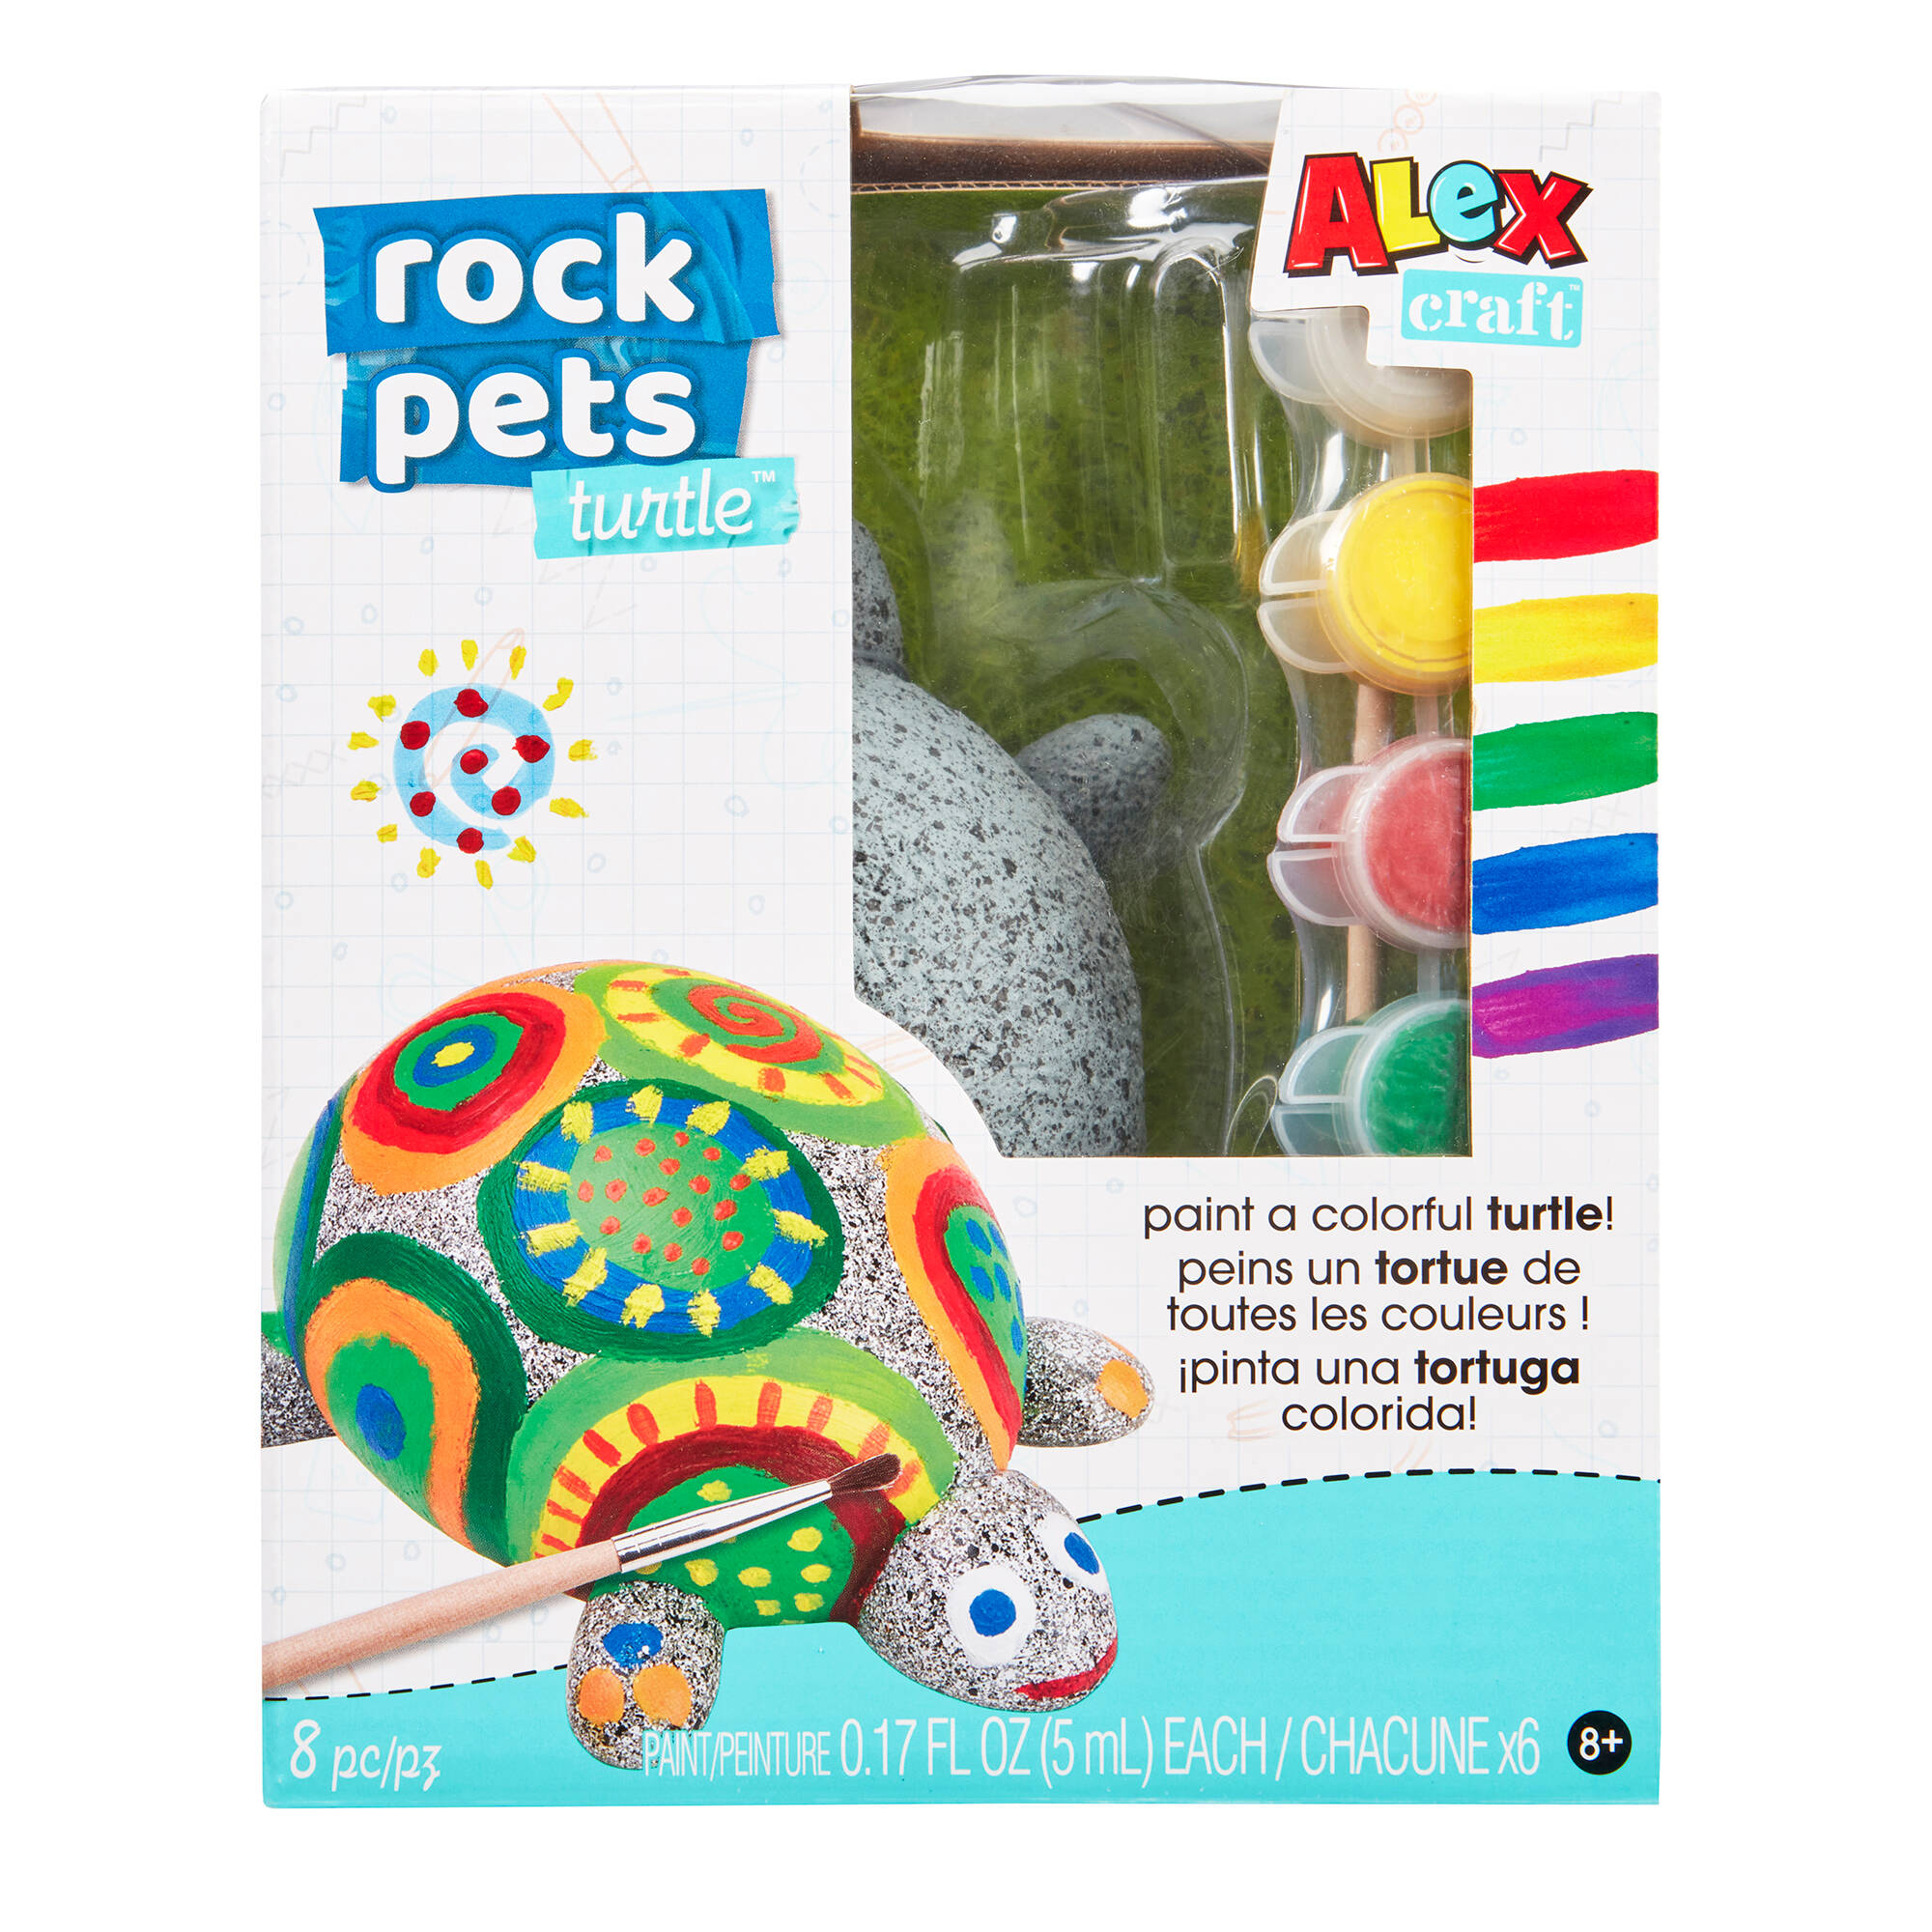 April brings pet rocks to the makerspace – THE STINGER